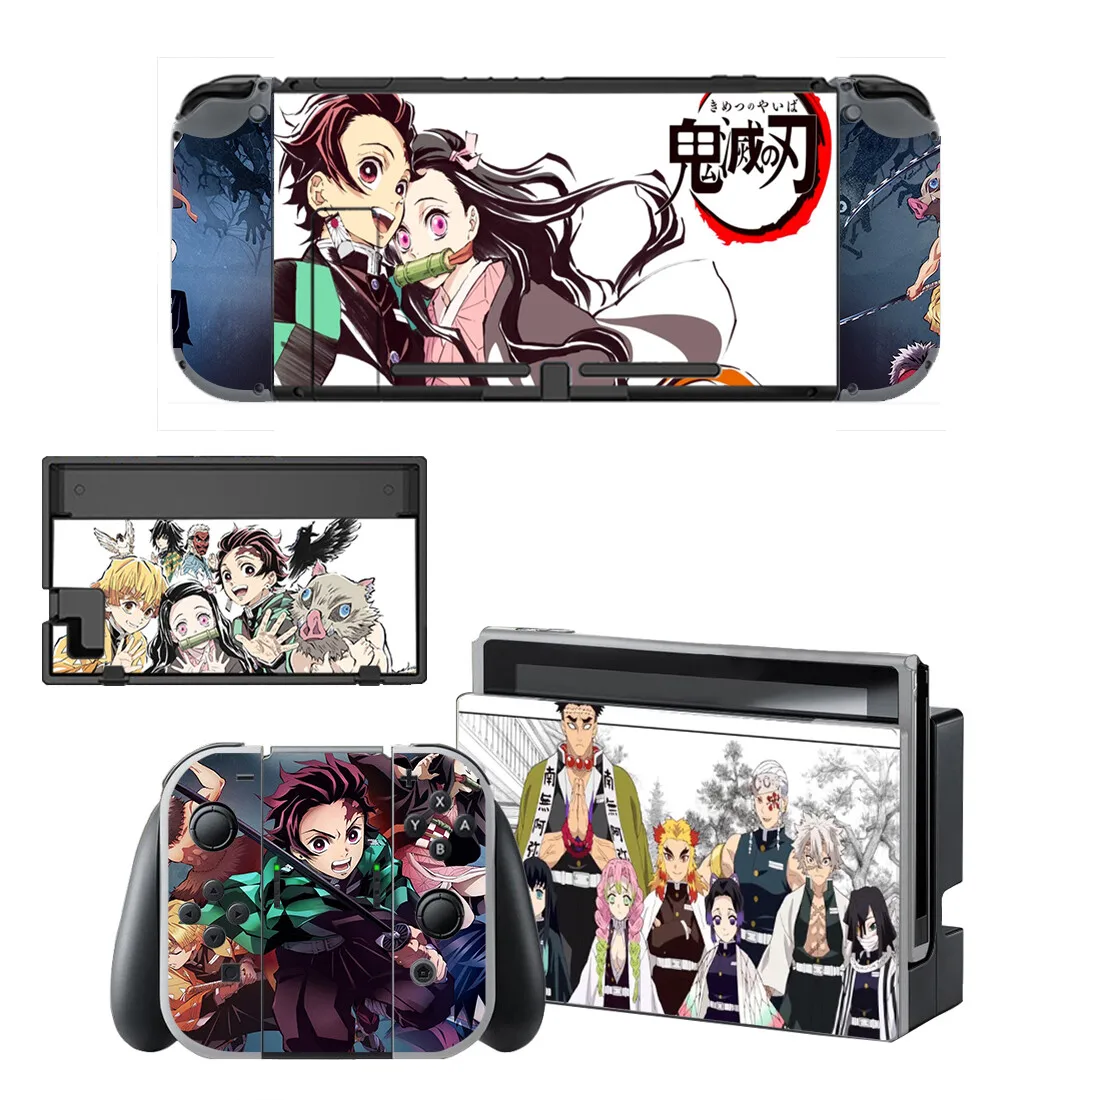 Demon Slayer Screen Protector Sticker Skin for Nintendo Switch NS Console Dock Charger Stand Holder Joycon Controller Skin